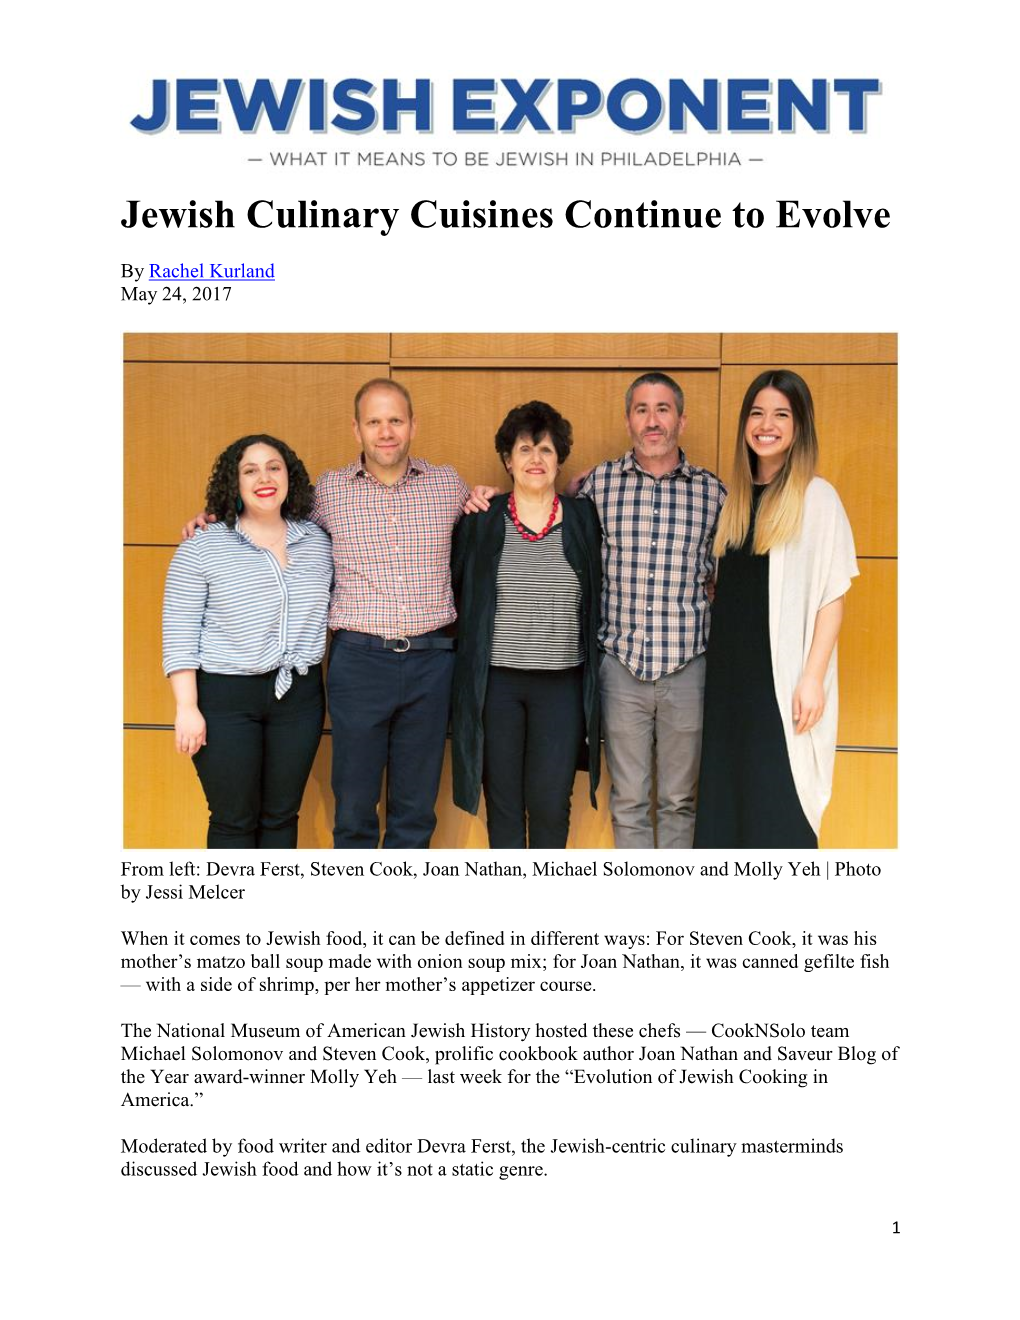 Jewish Culinary Cuisines Continue to Evolve